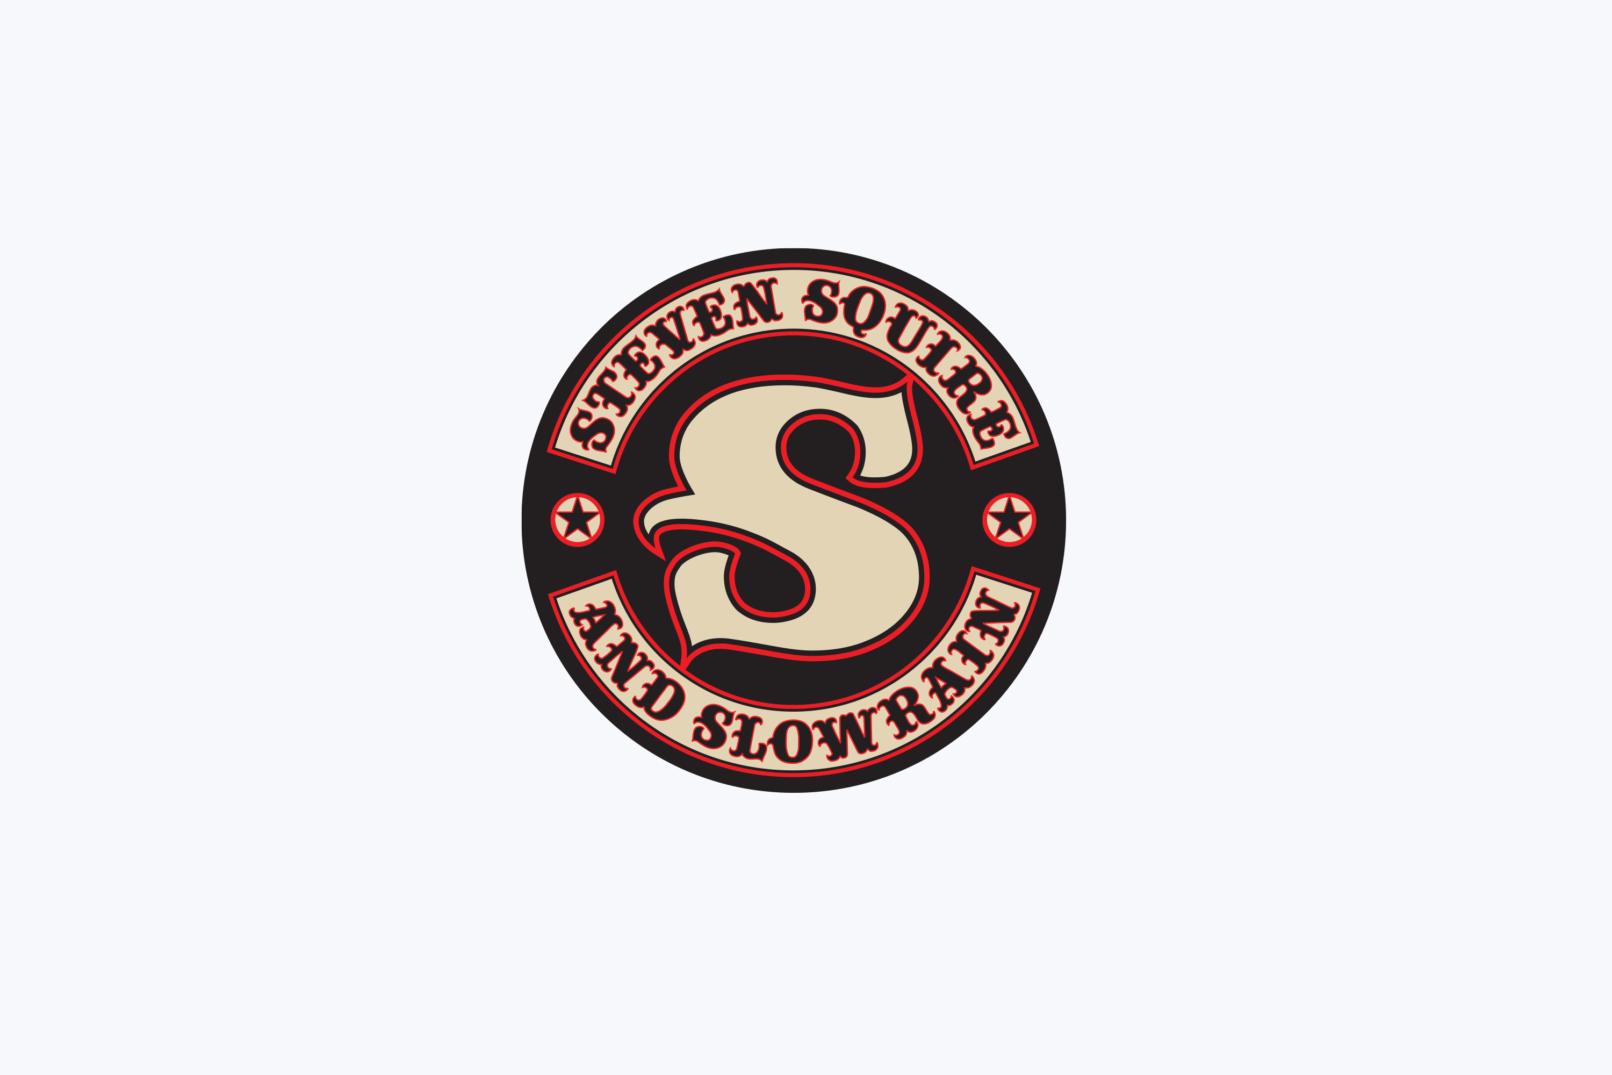 Steven Squire and Slowrain logo